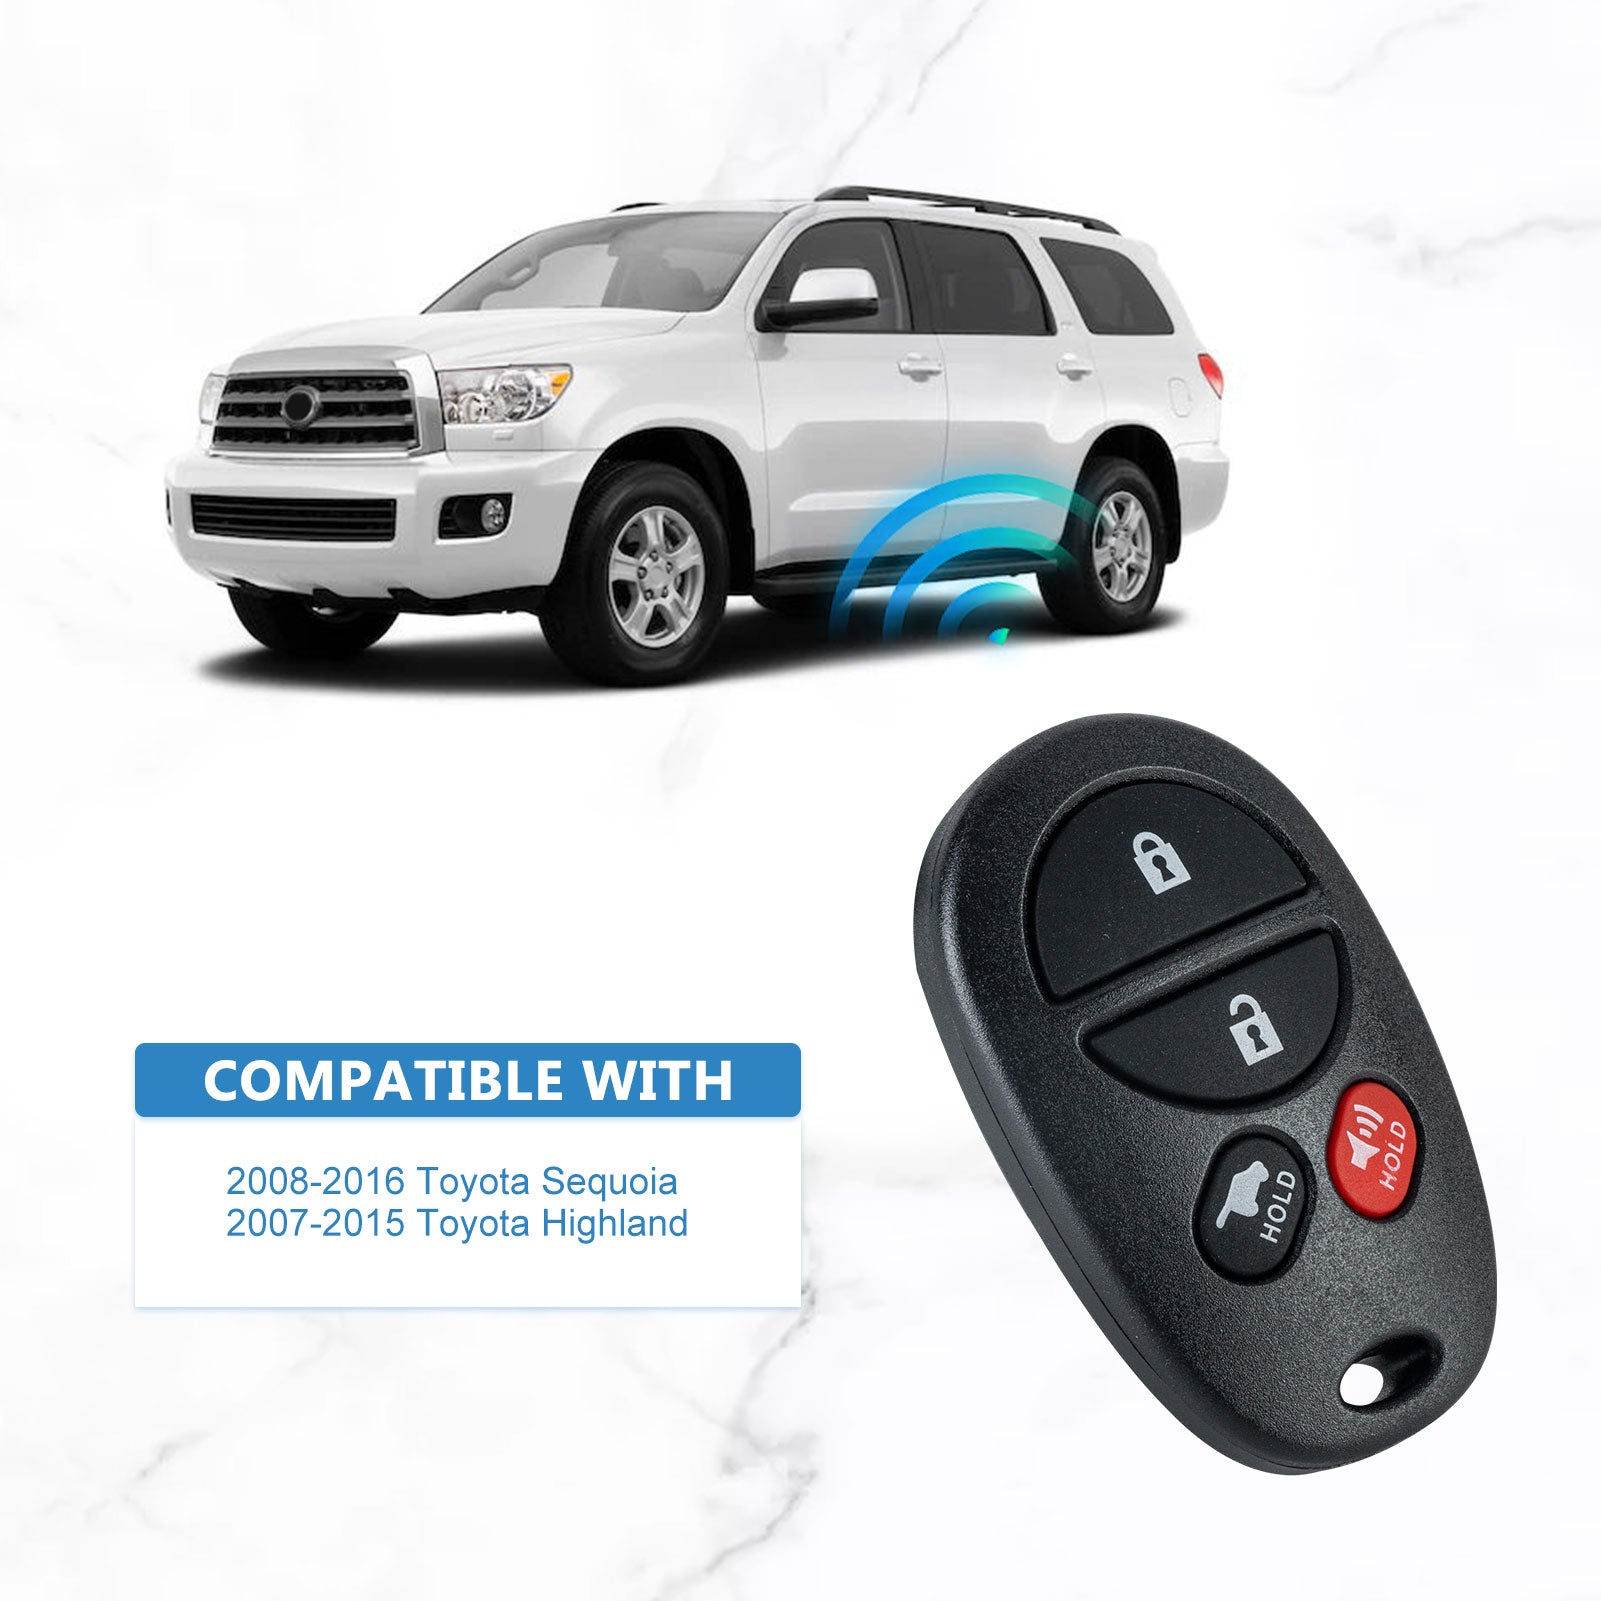 315MHZ Keyless Entry Remote Control Replacement for 2008-2016 Toyota Sequoia 2007-2015 Toyota Highland GQ43VT20T  KR-T4RD